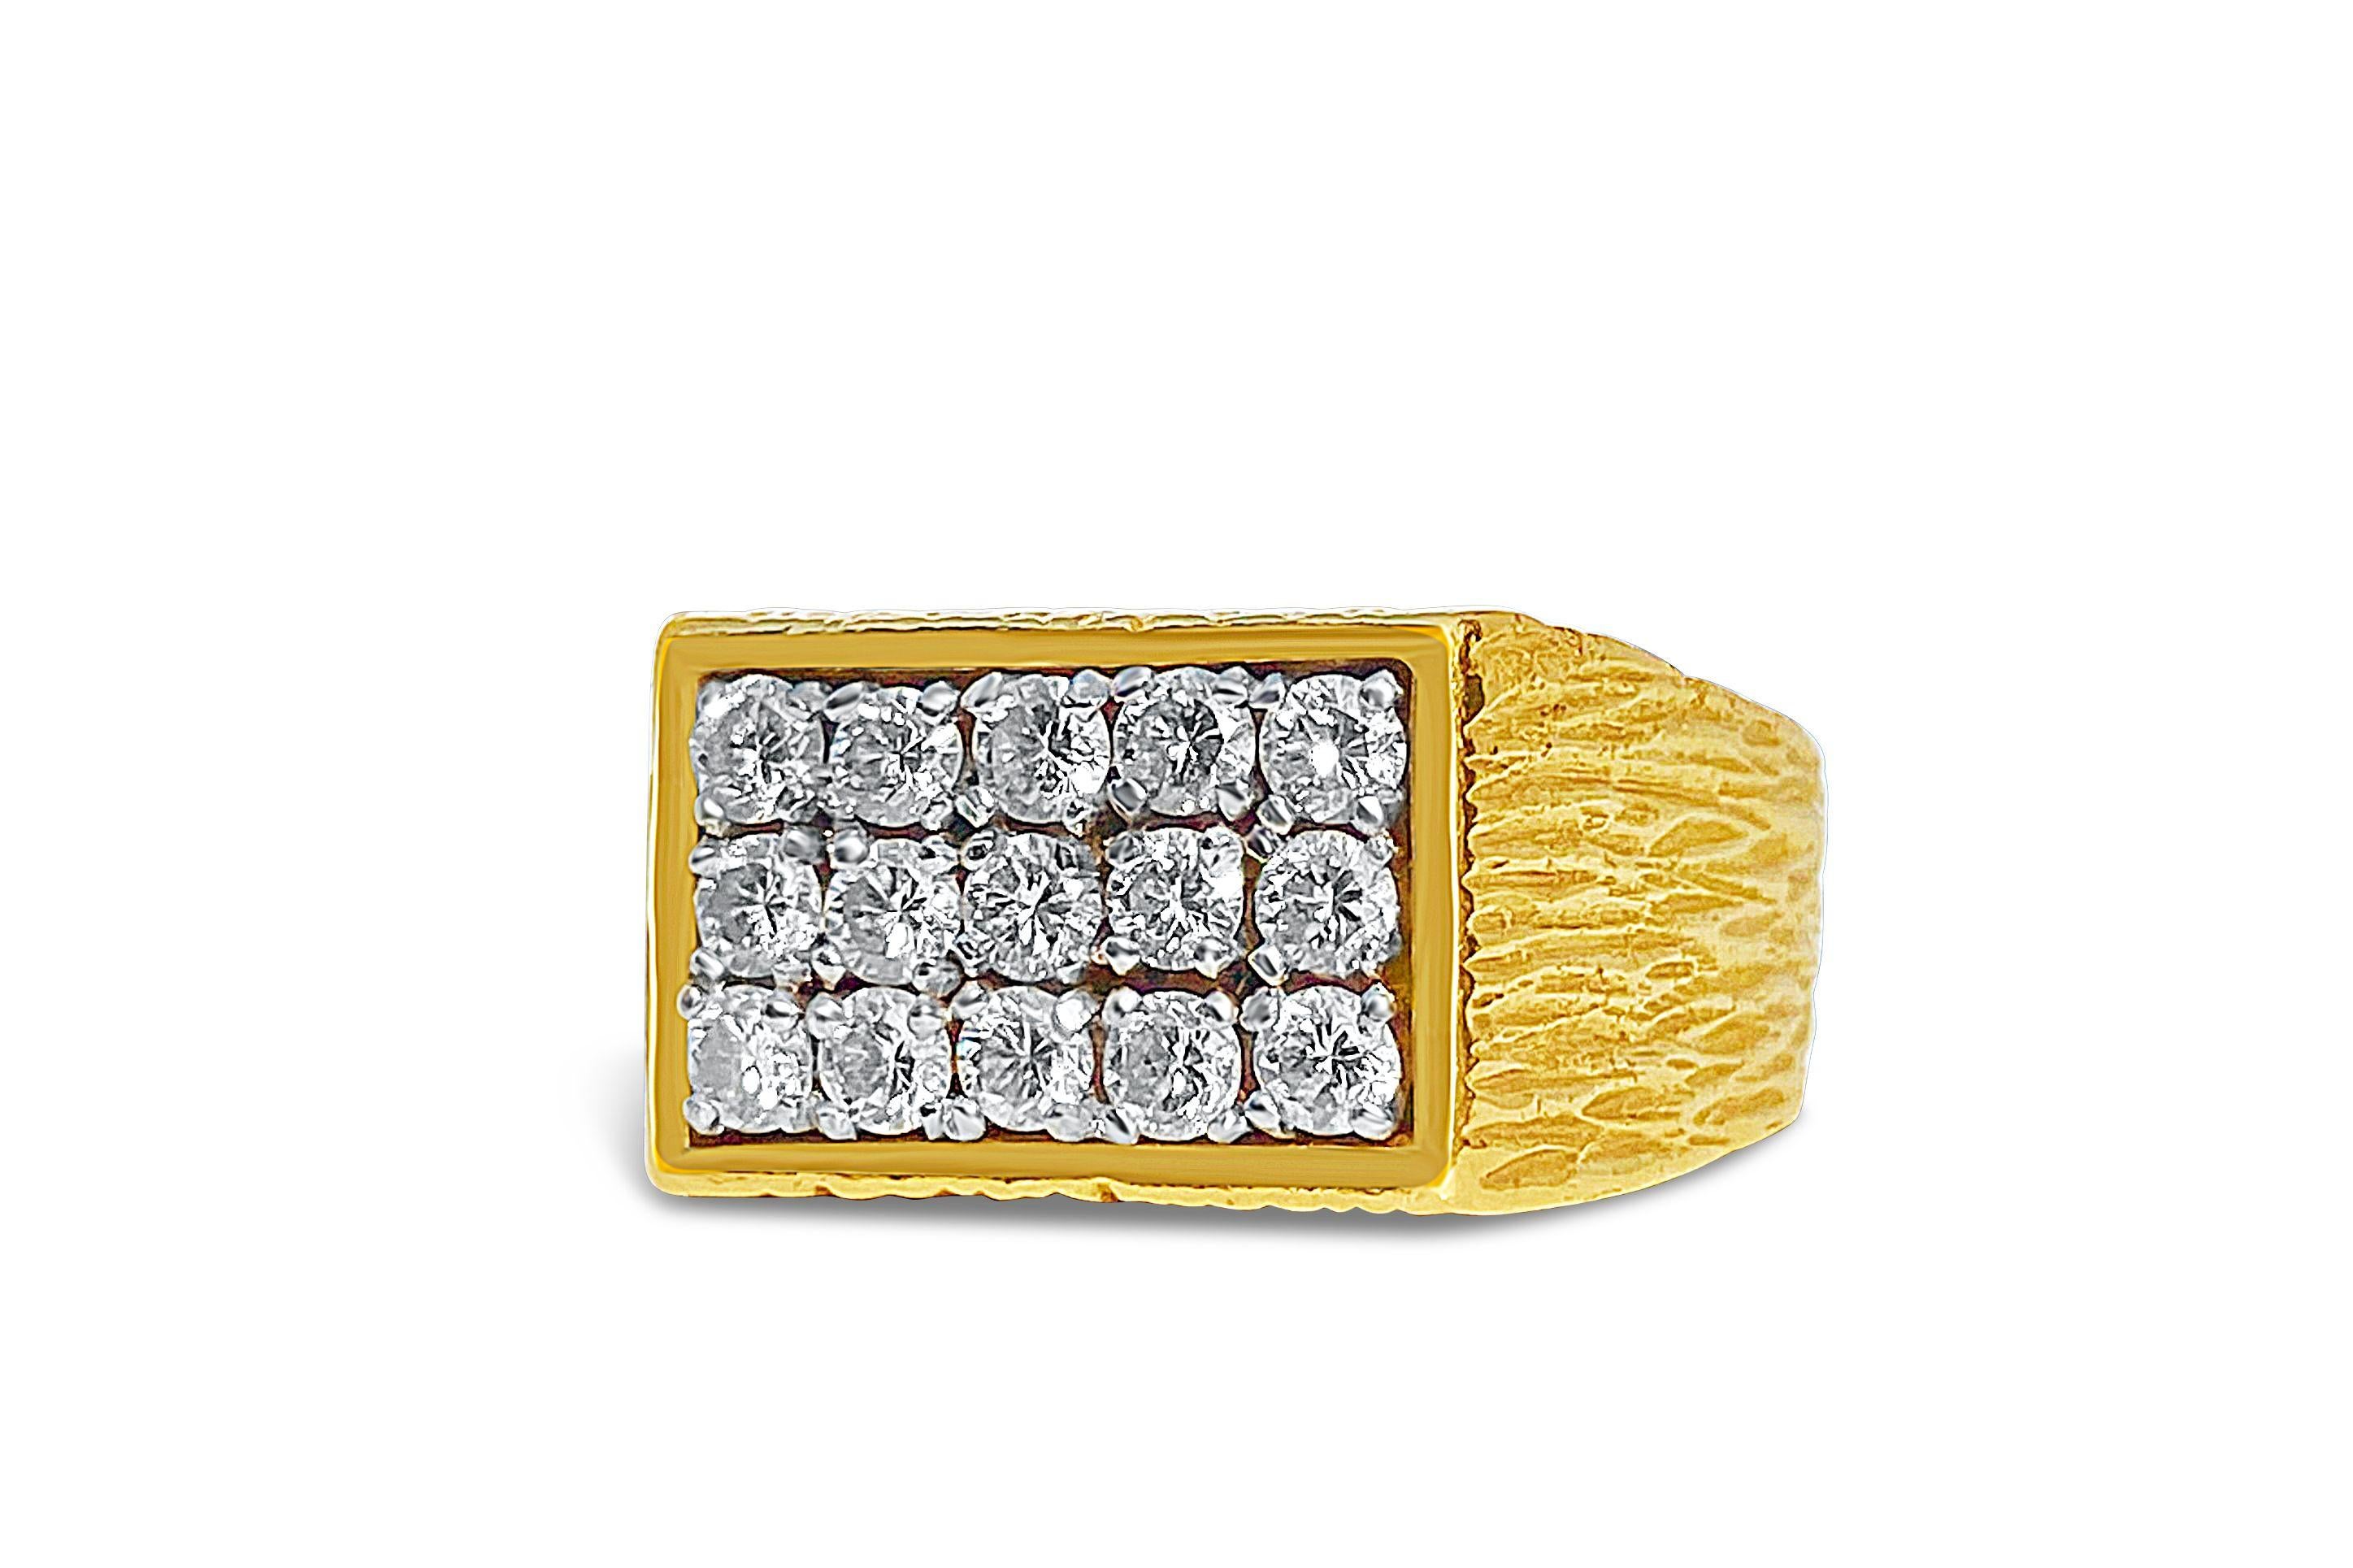 Centering 15 Round-Brilliant Cut Diamonds totaling 0.65 Carats and set in 18K Yellow Gold, this 14.7 gram, Italian-made men's ring is a spuerb choice for the discerning collector. 

Details:
✔ Stone: White Diamond
✔ Diamond Weight: 0.65 carats
✔